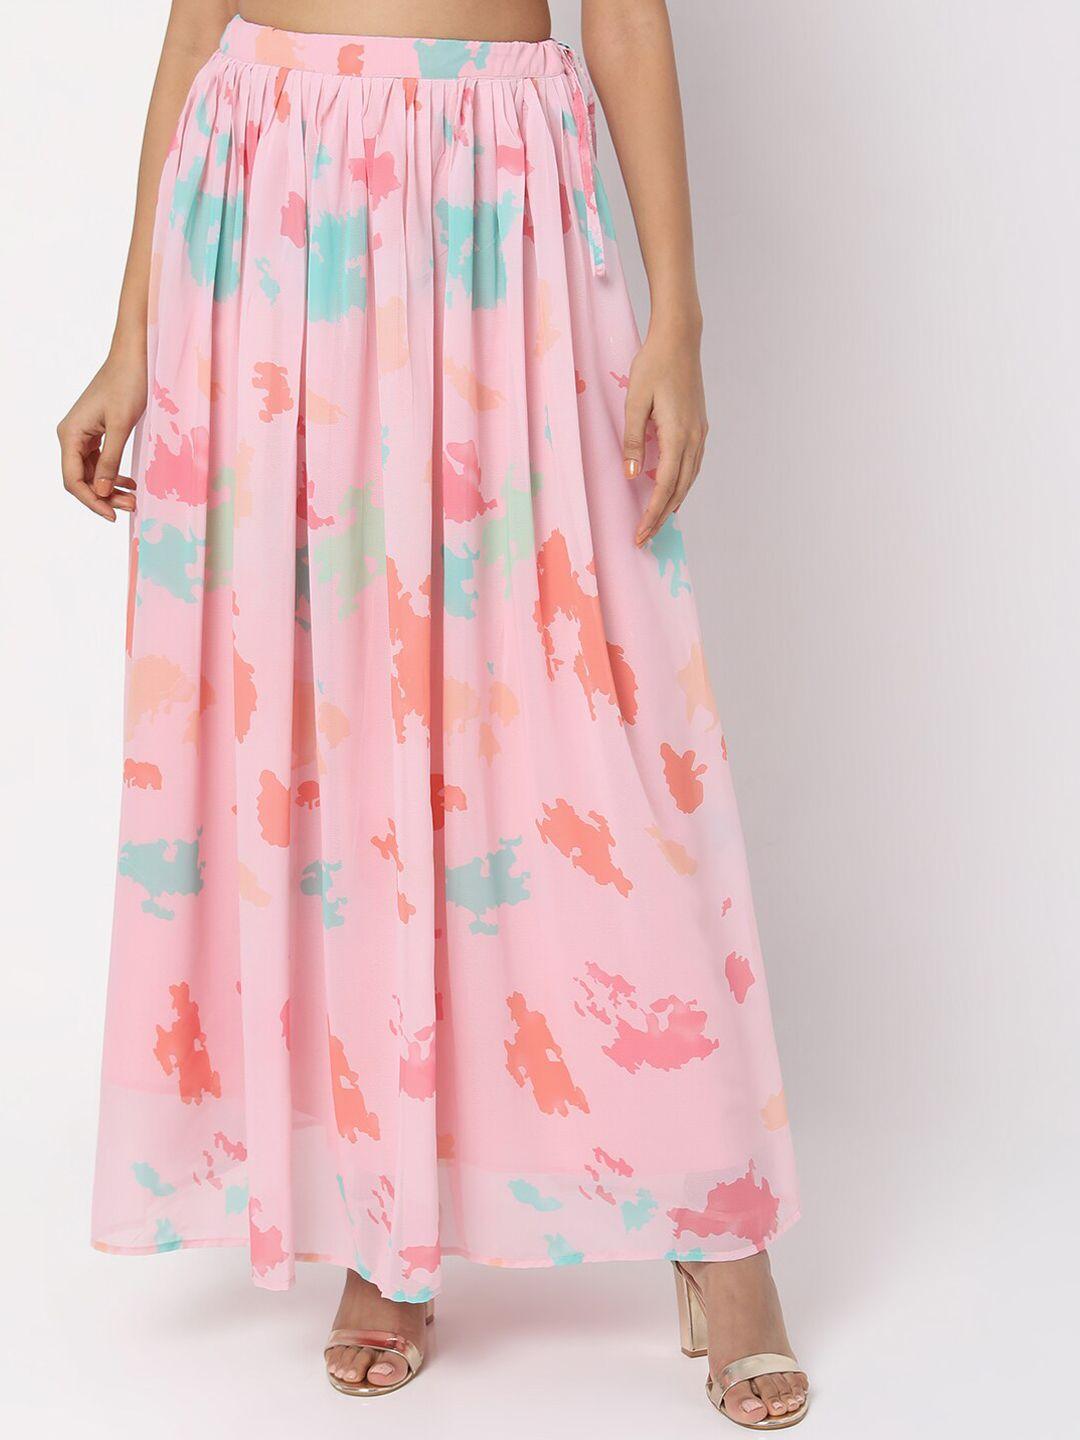 ethnicity-women-peach-&-blue-abstract-printed-maxi-skirt